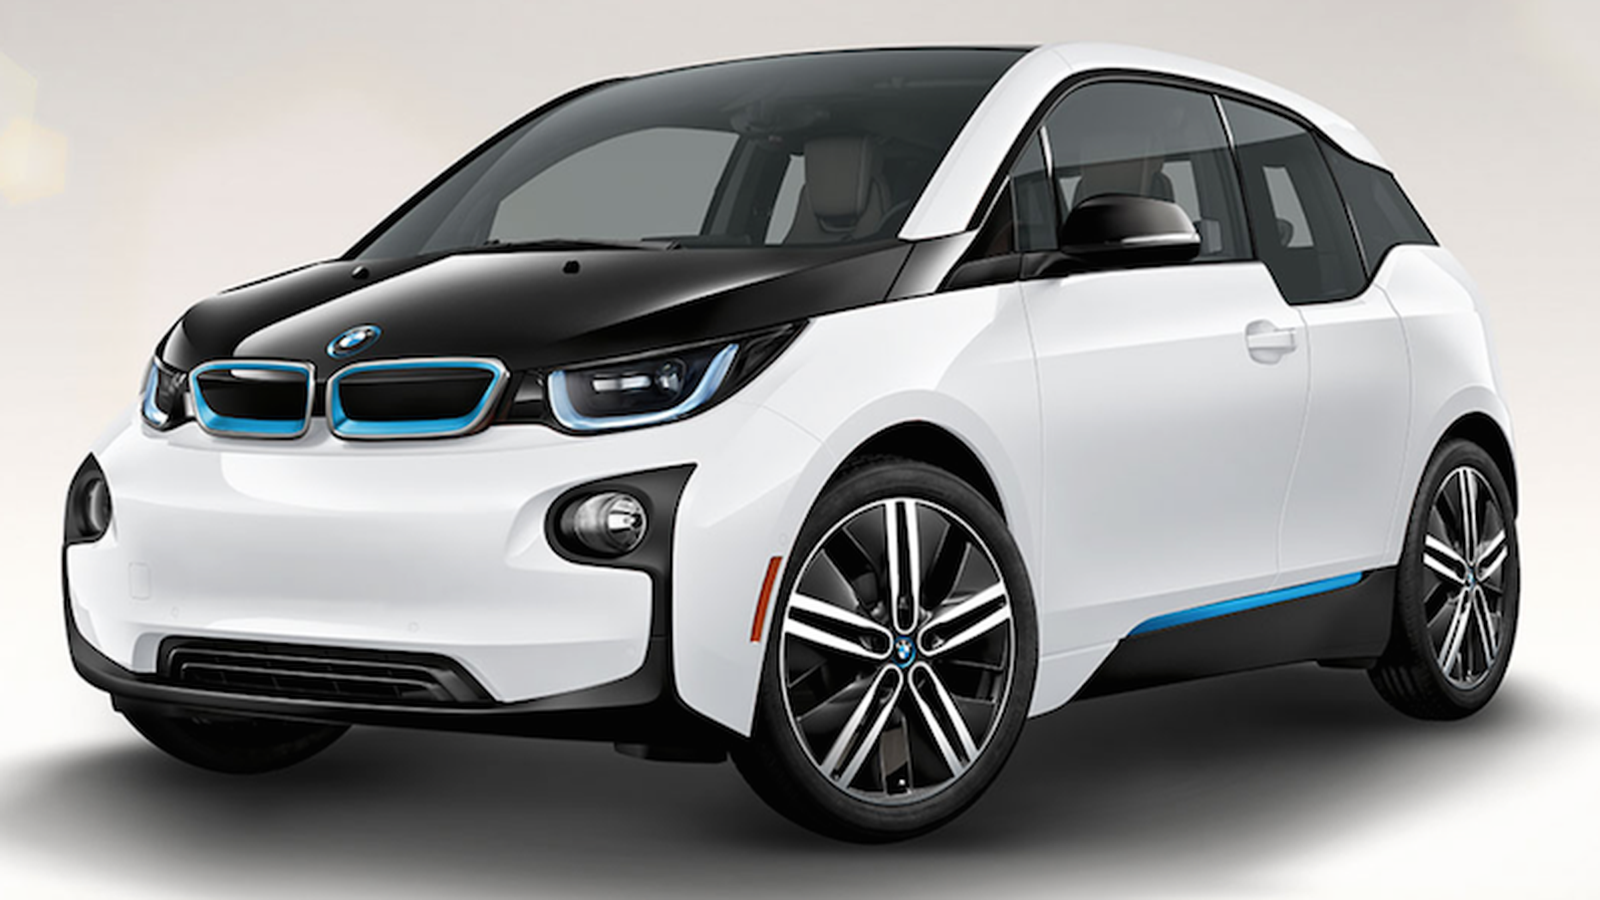 New Report Says Apple Was in Talks to Use BMW i3 as Basis for Electric Car  Project - MacRumors